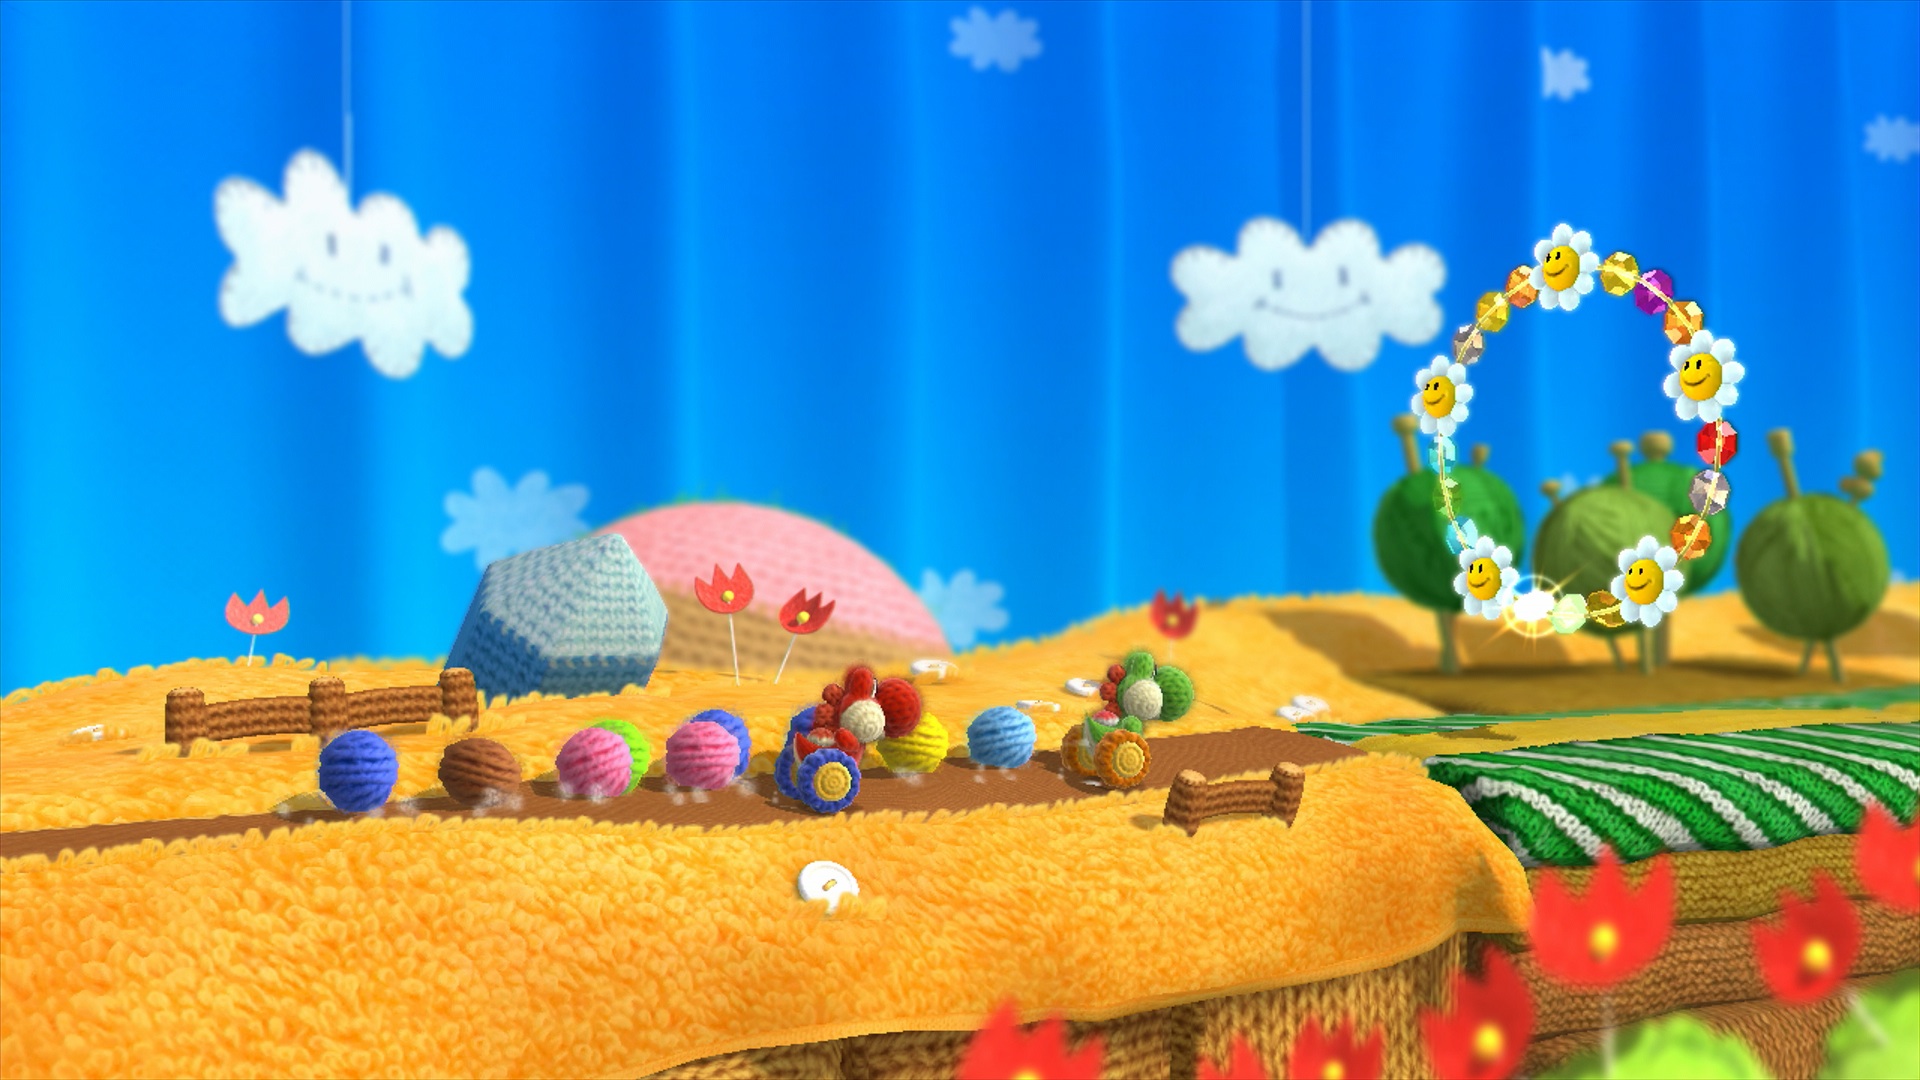 Images of Yoshi's Woolly World | 1920x1080